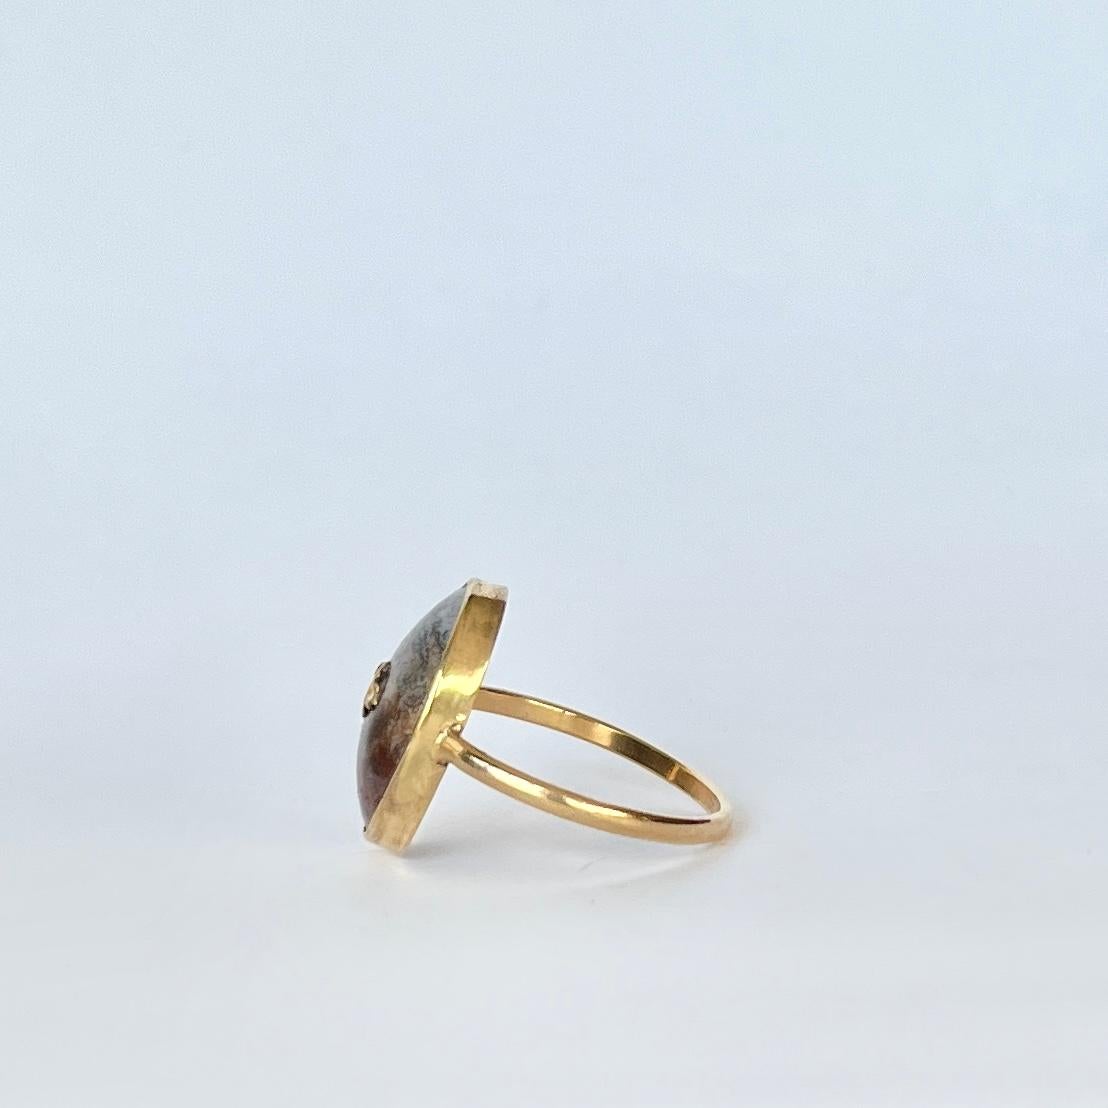 Vintage Agate and 9 Carat Gold Ring In Good Condition For Sale In Chipping Campden, GB